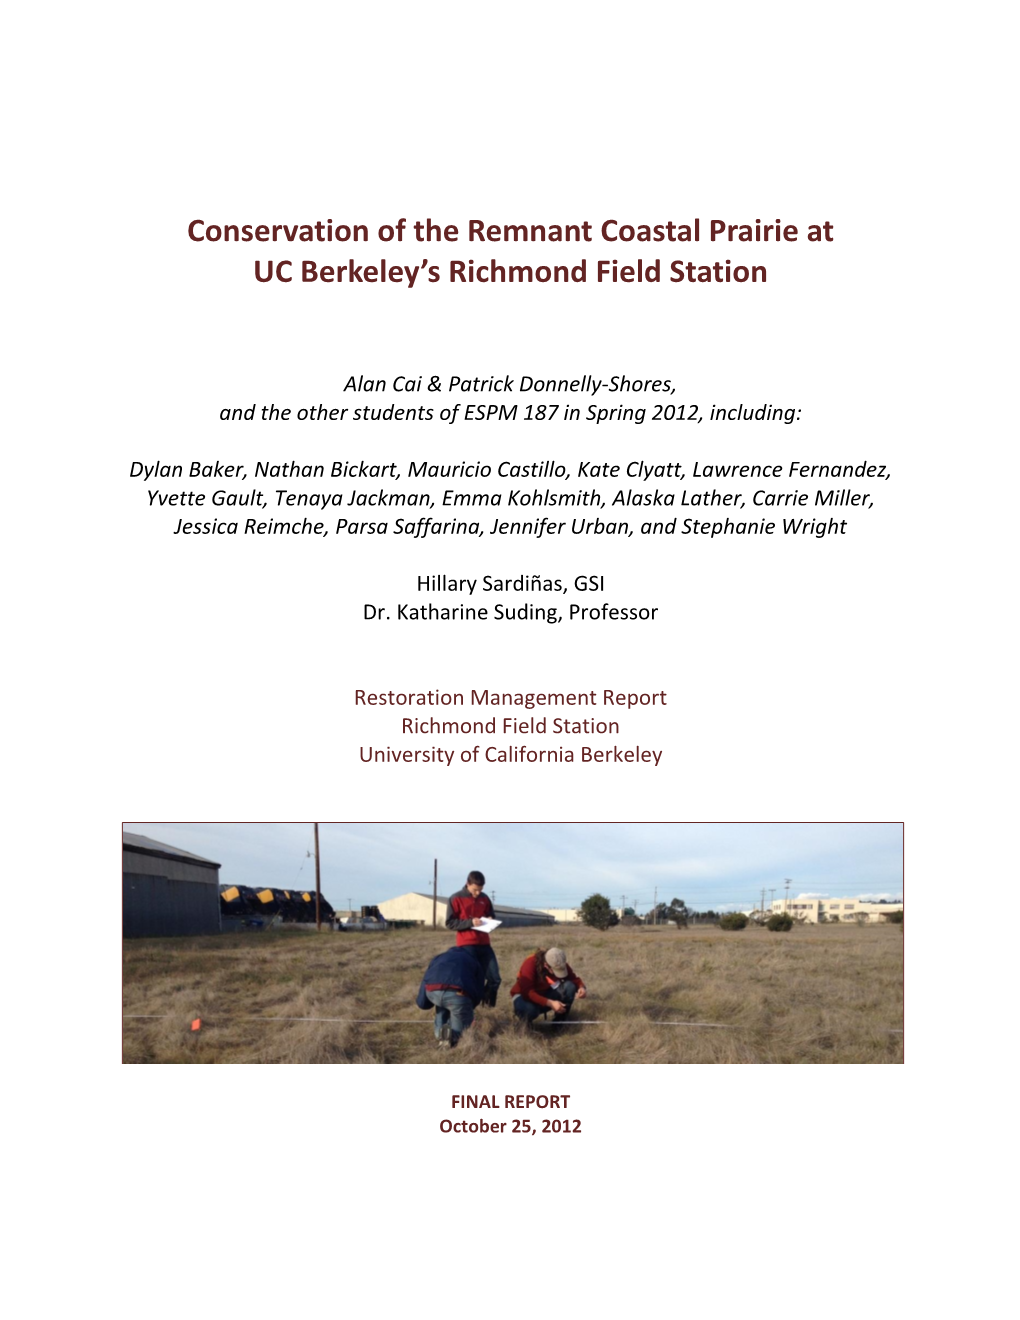 Conservation of the Remnant Coastal Prairie at UC Berkeley's Richmond